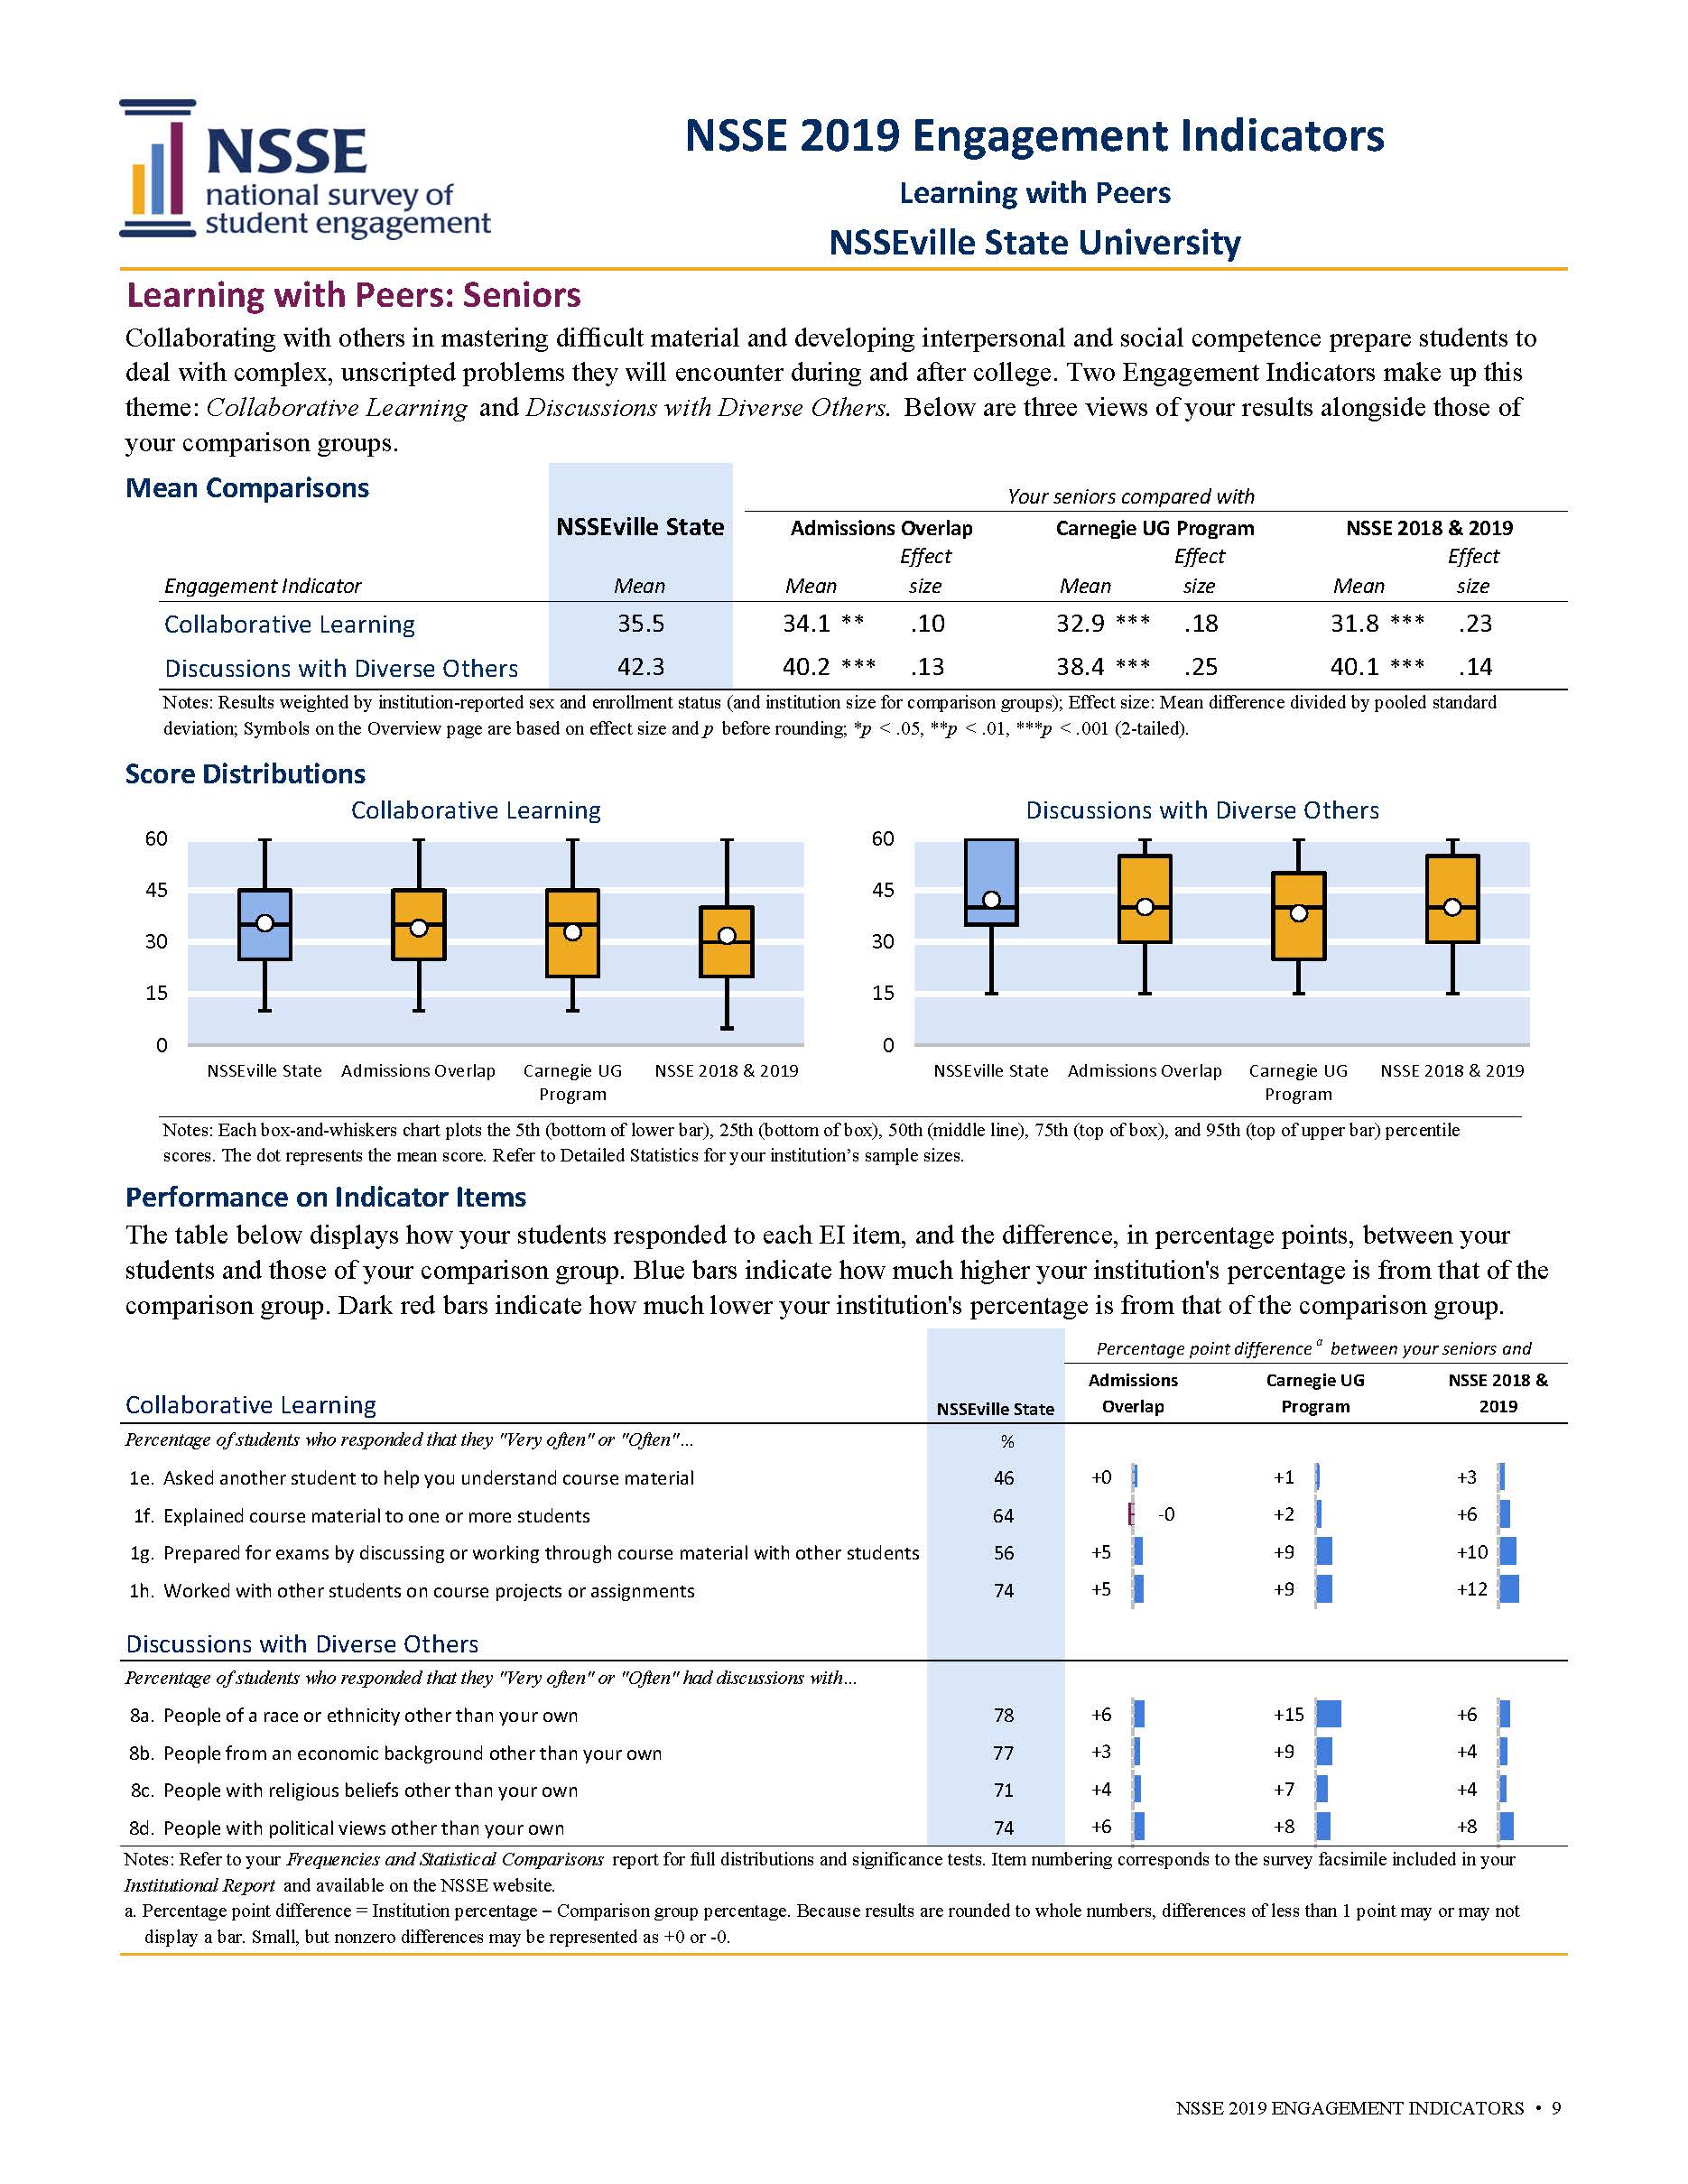 Sample Report: page 9 of NSSE Engagement Indicators